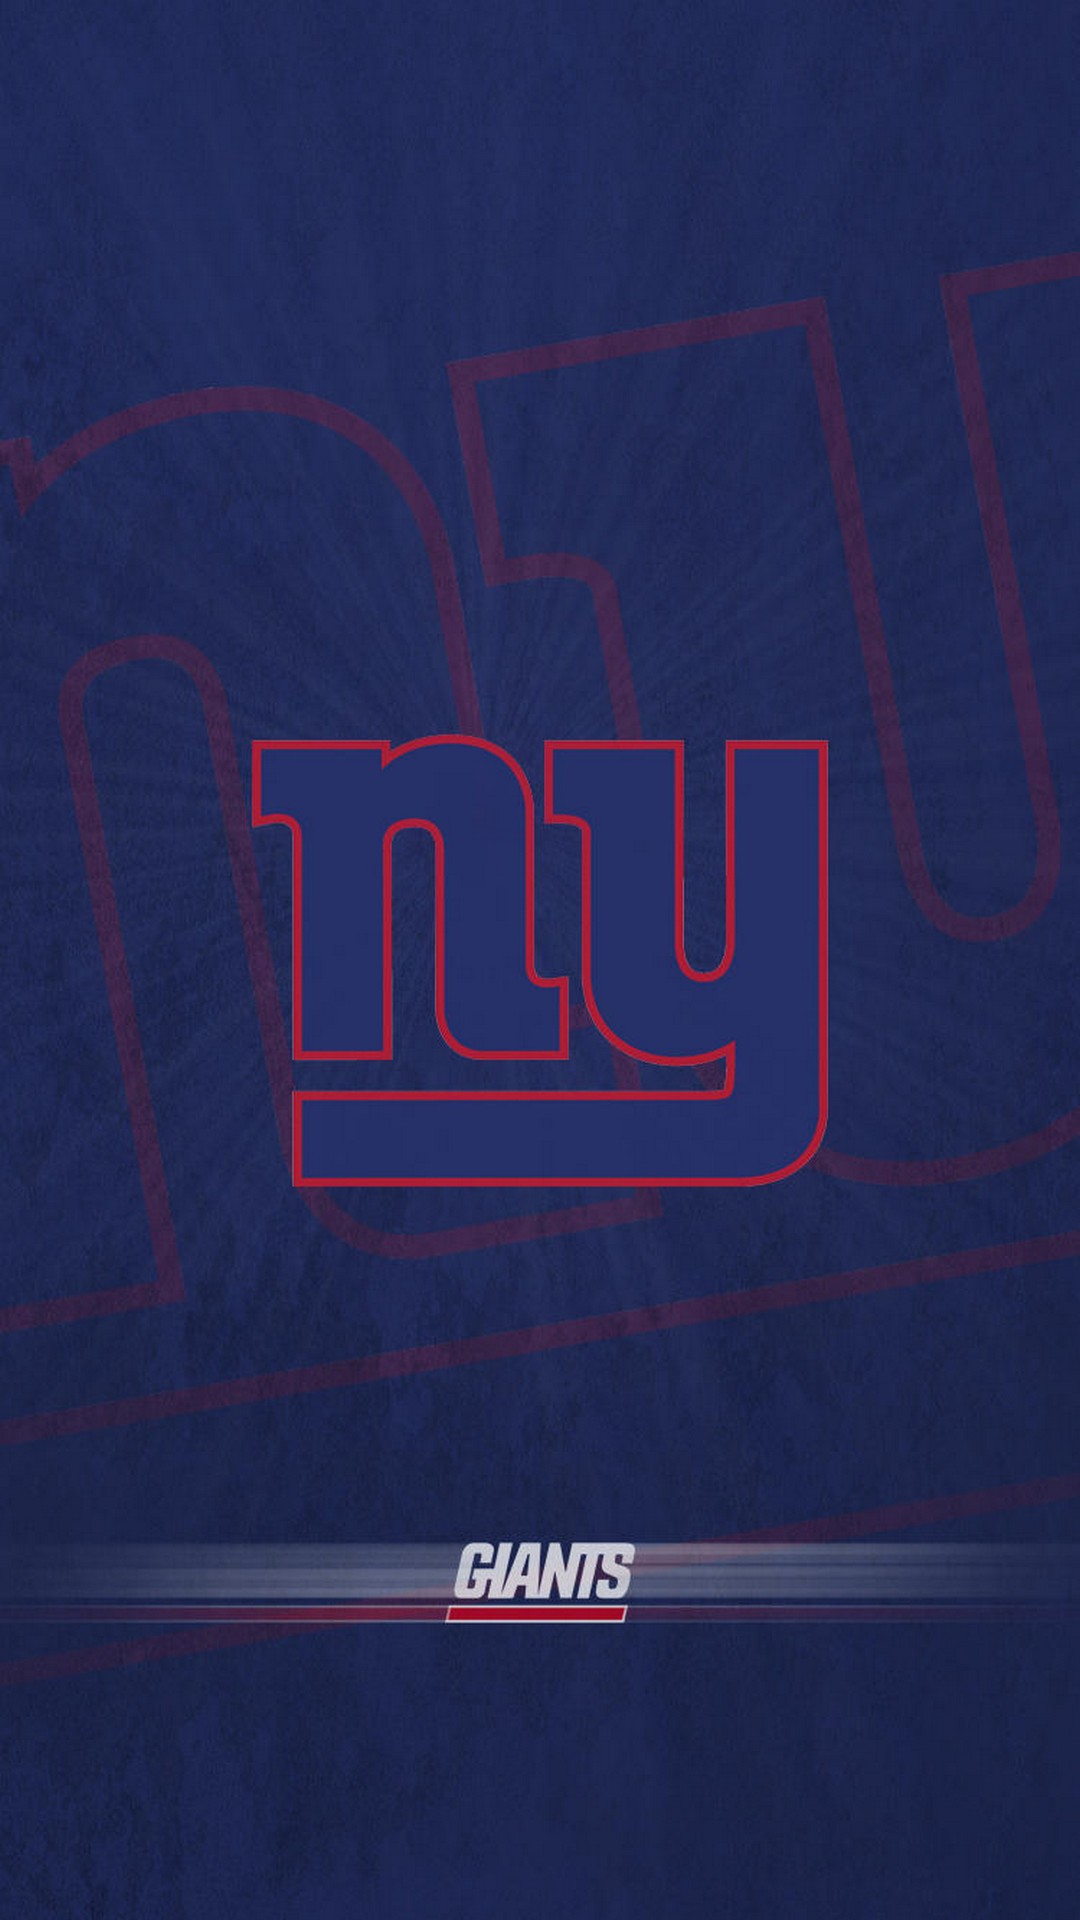 New York Giants iPhone Wallpaper New With high-resolution 1080X1920 pixel. Donwload and set as wallpaper for your iPhone X, iPhone XS home screen backgrounds, XS Max, XR, iPhone8 lock screen wallpaper, iPhone 7, 6, SE, and other mobile devices